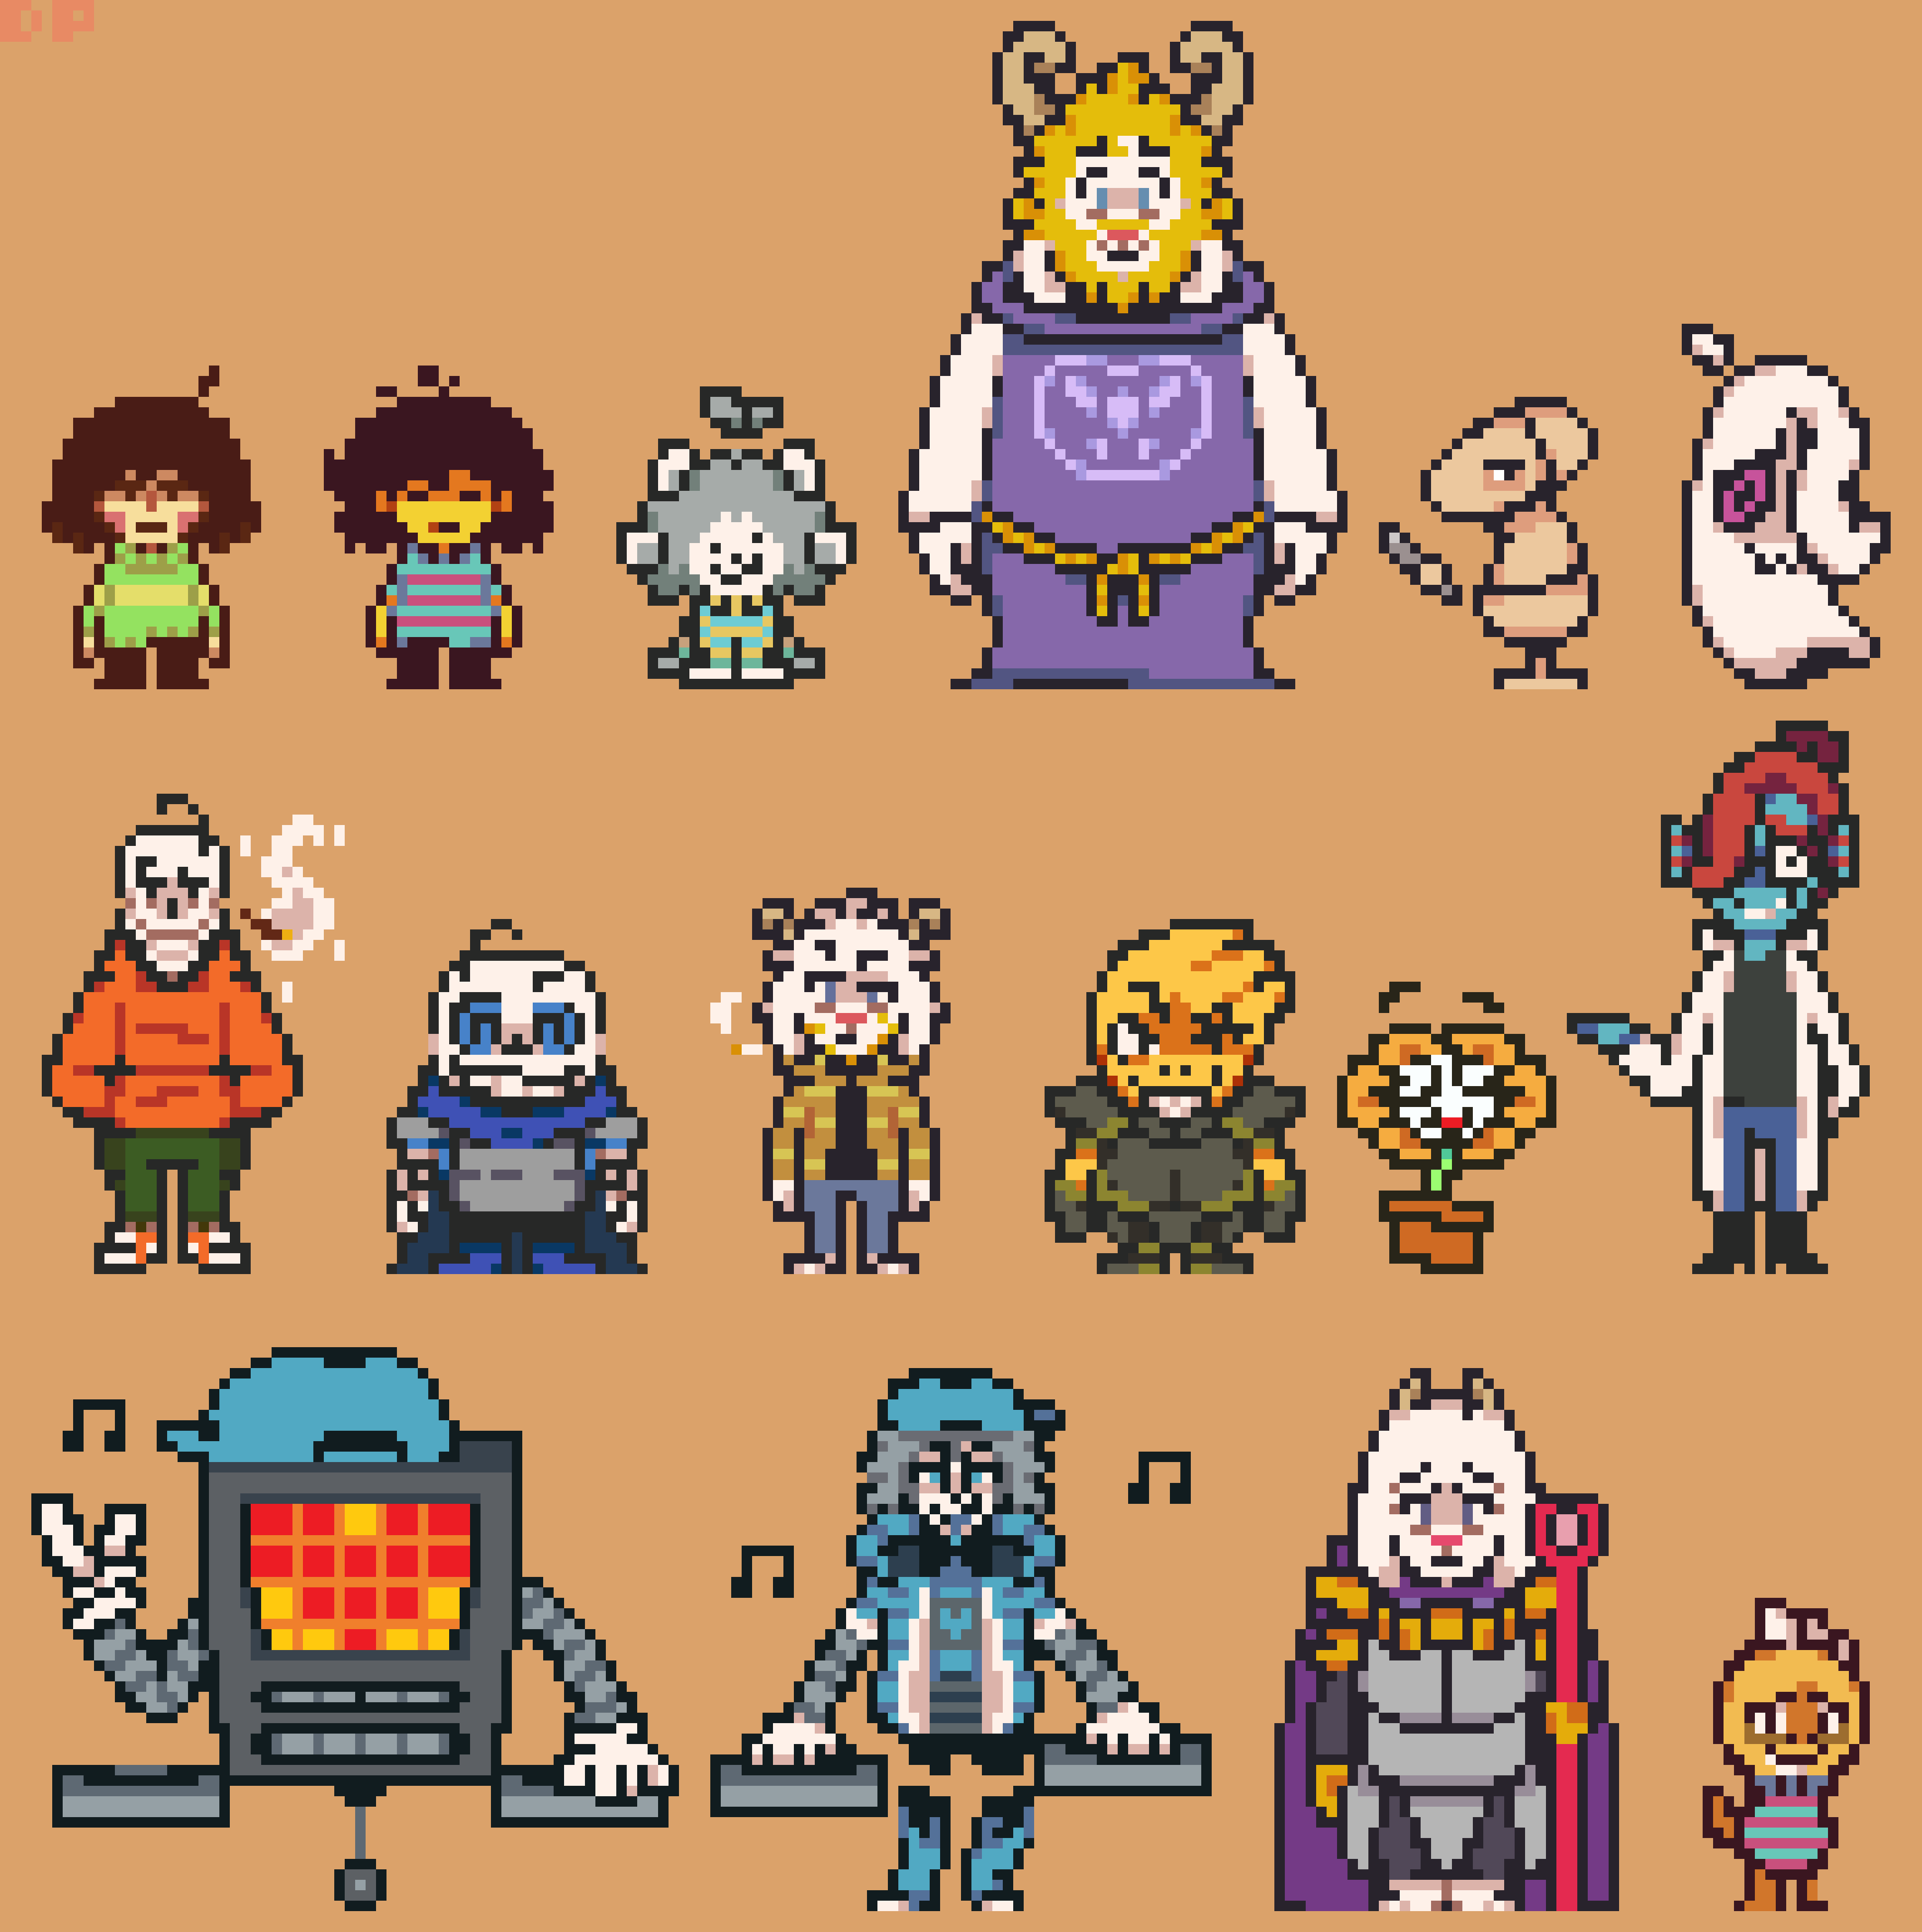 UNDERTALE: Mobile Port] Lord S by Underboi2 on DeviantArt